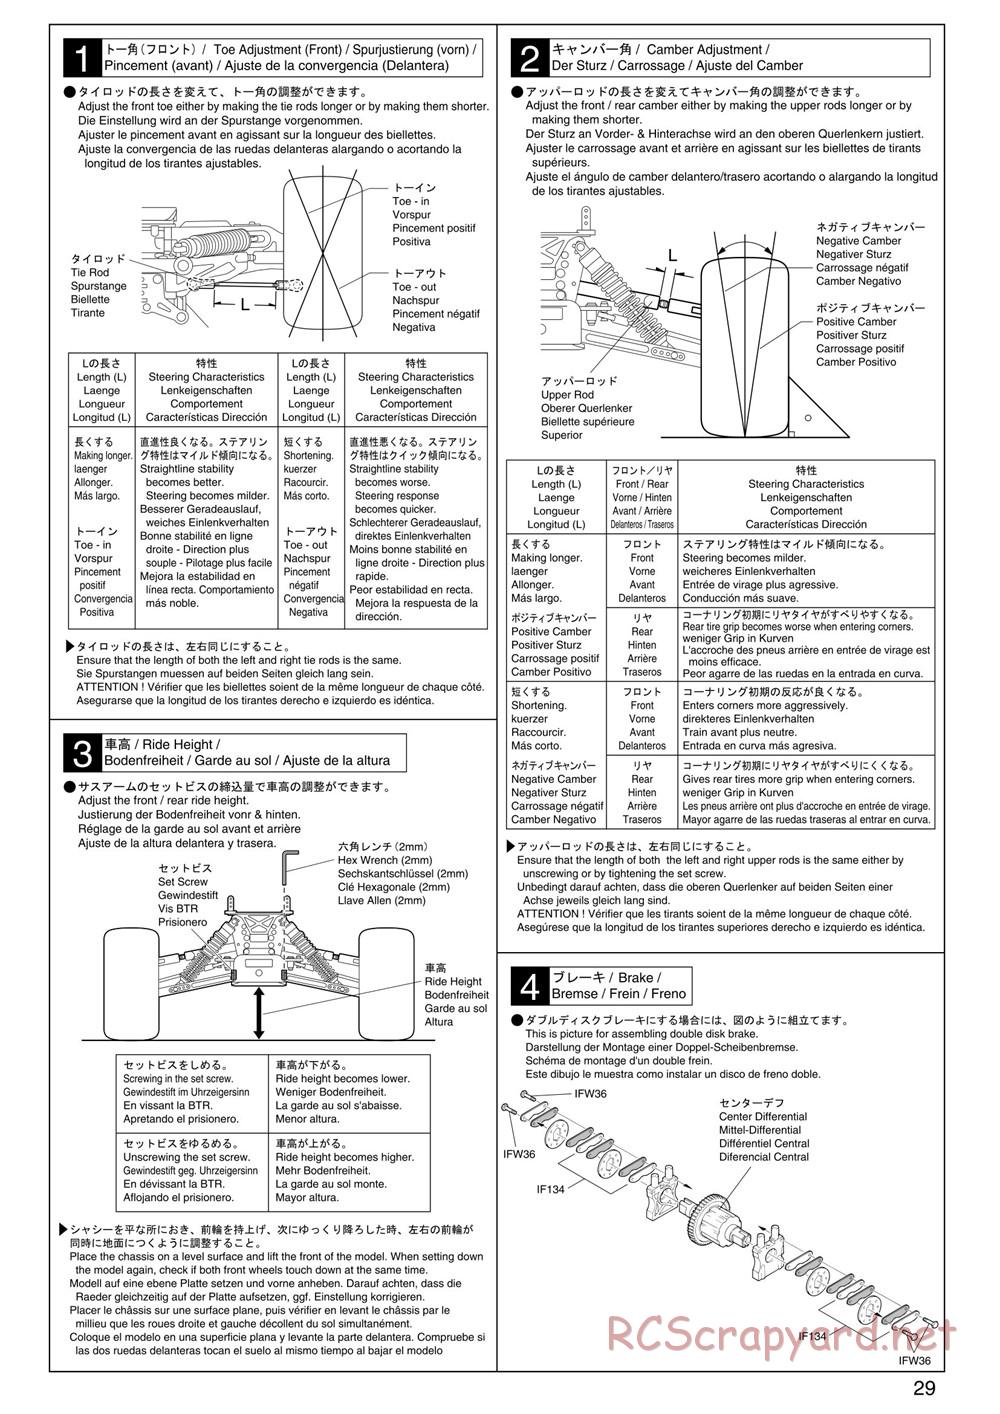 Kyosho - Inferno ST (2005) - Manual - Page 29